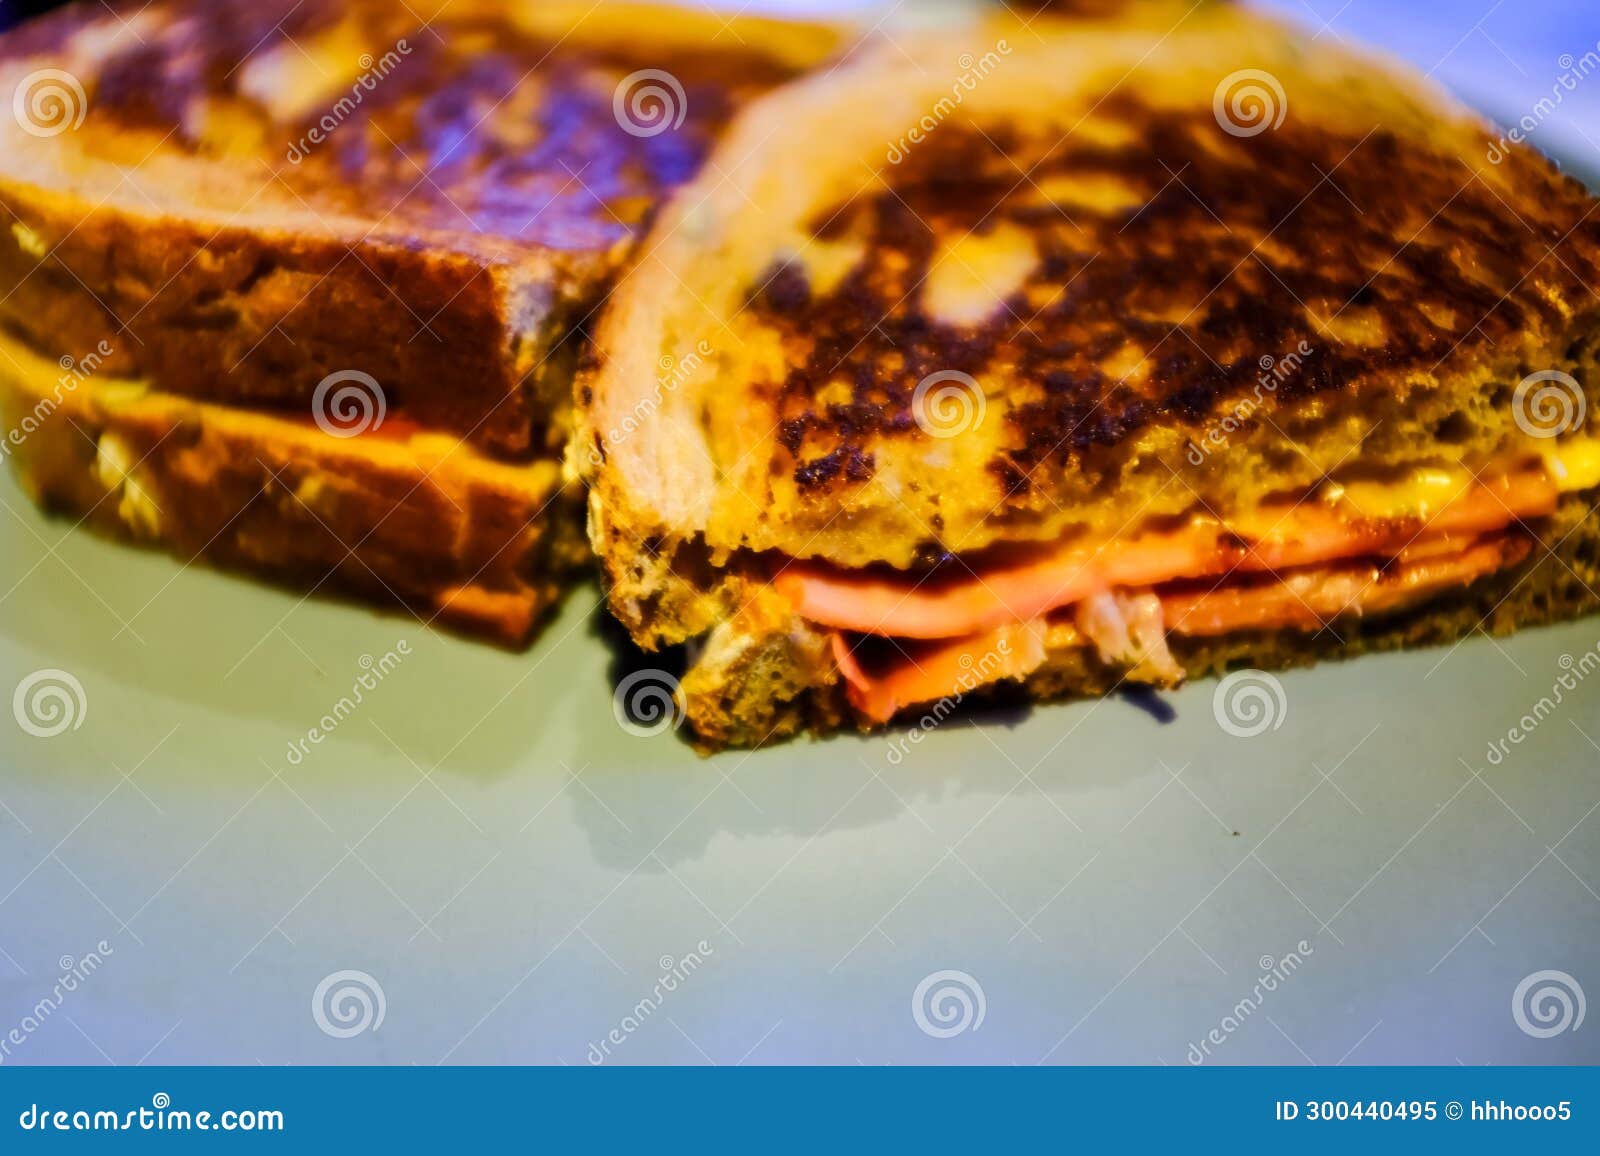 Close-up of the Sandwich on the Dish. Western Sandwich Stock Image ...